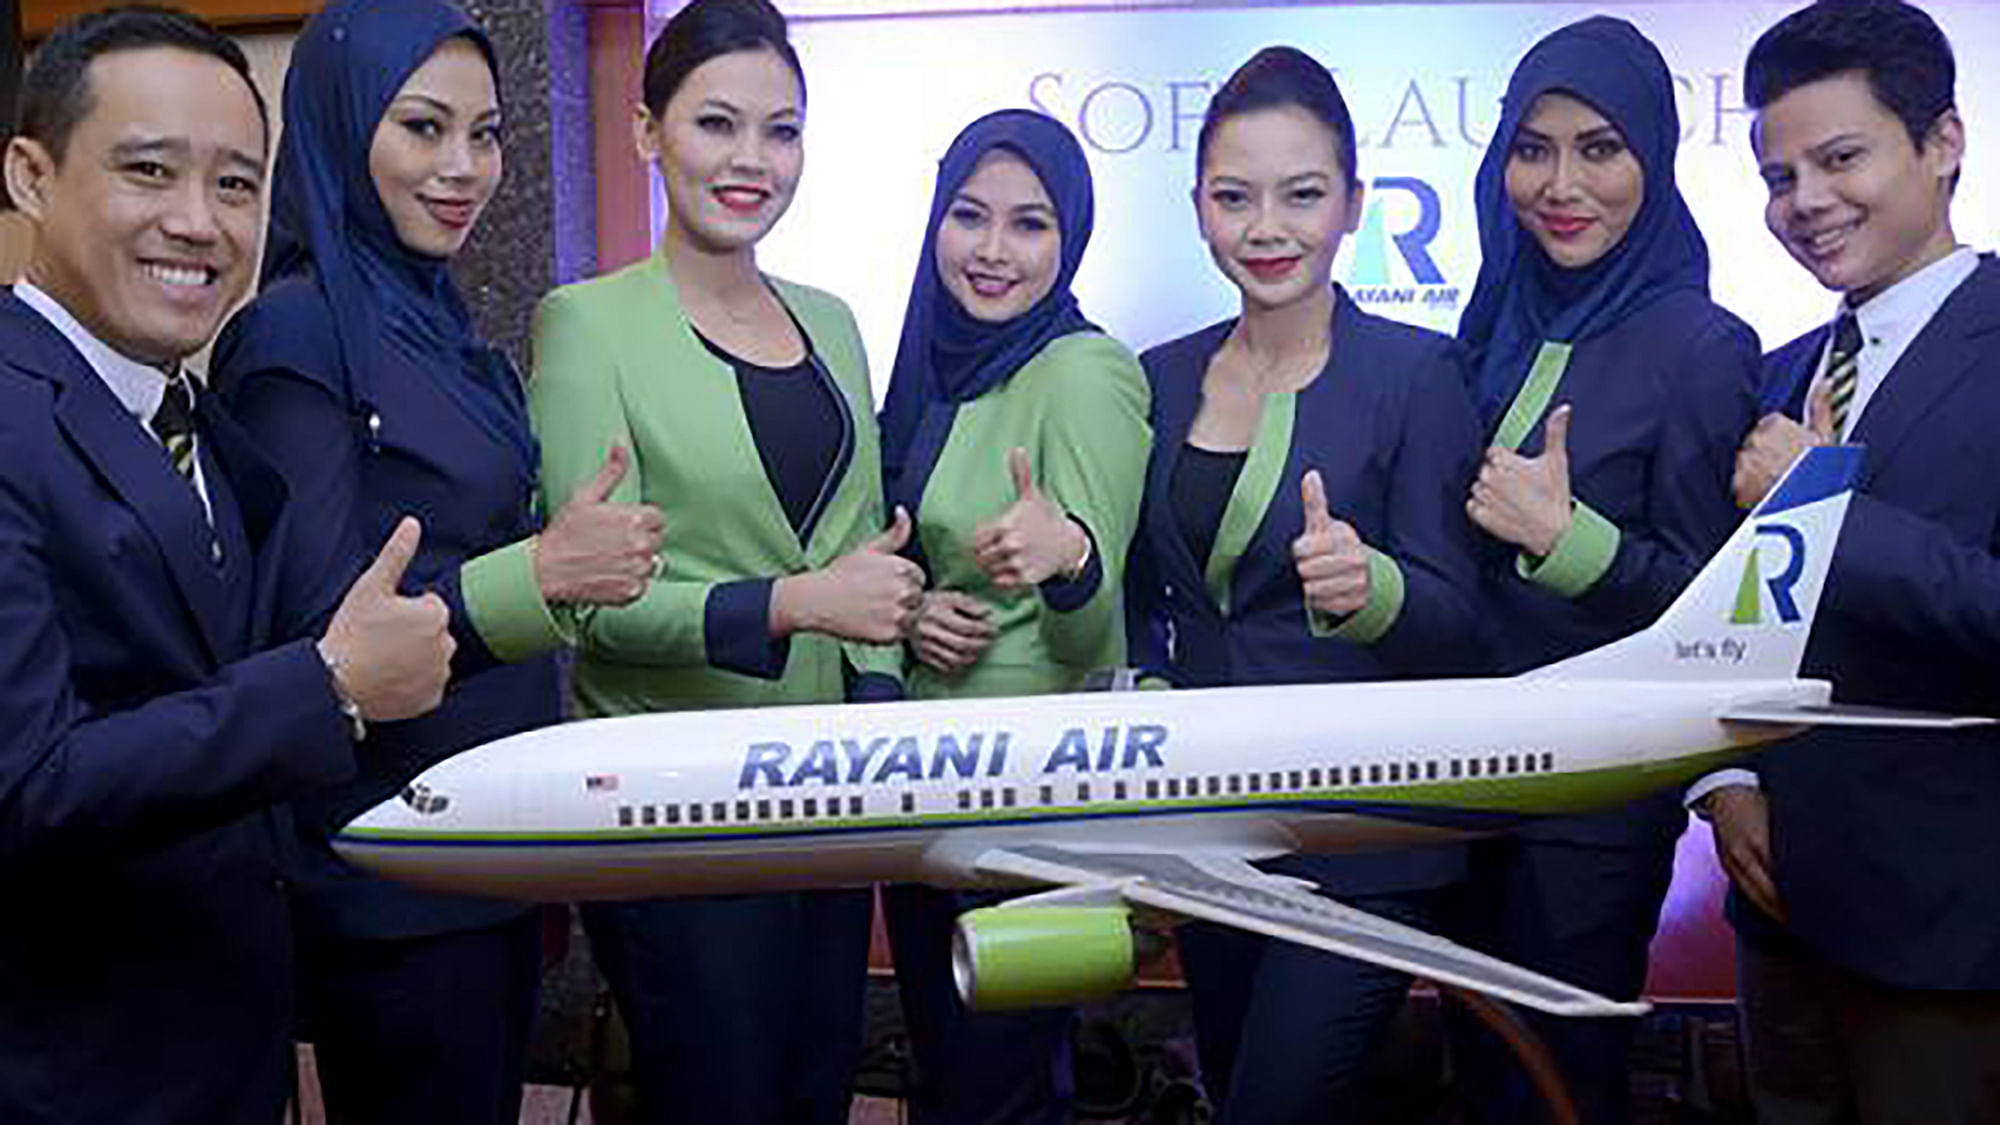 Rayani Air crew poses at the launch. (Photo: <a href="https://twitter.com/501Awani/status/678134800582967296">Twitter</a>)